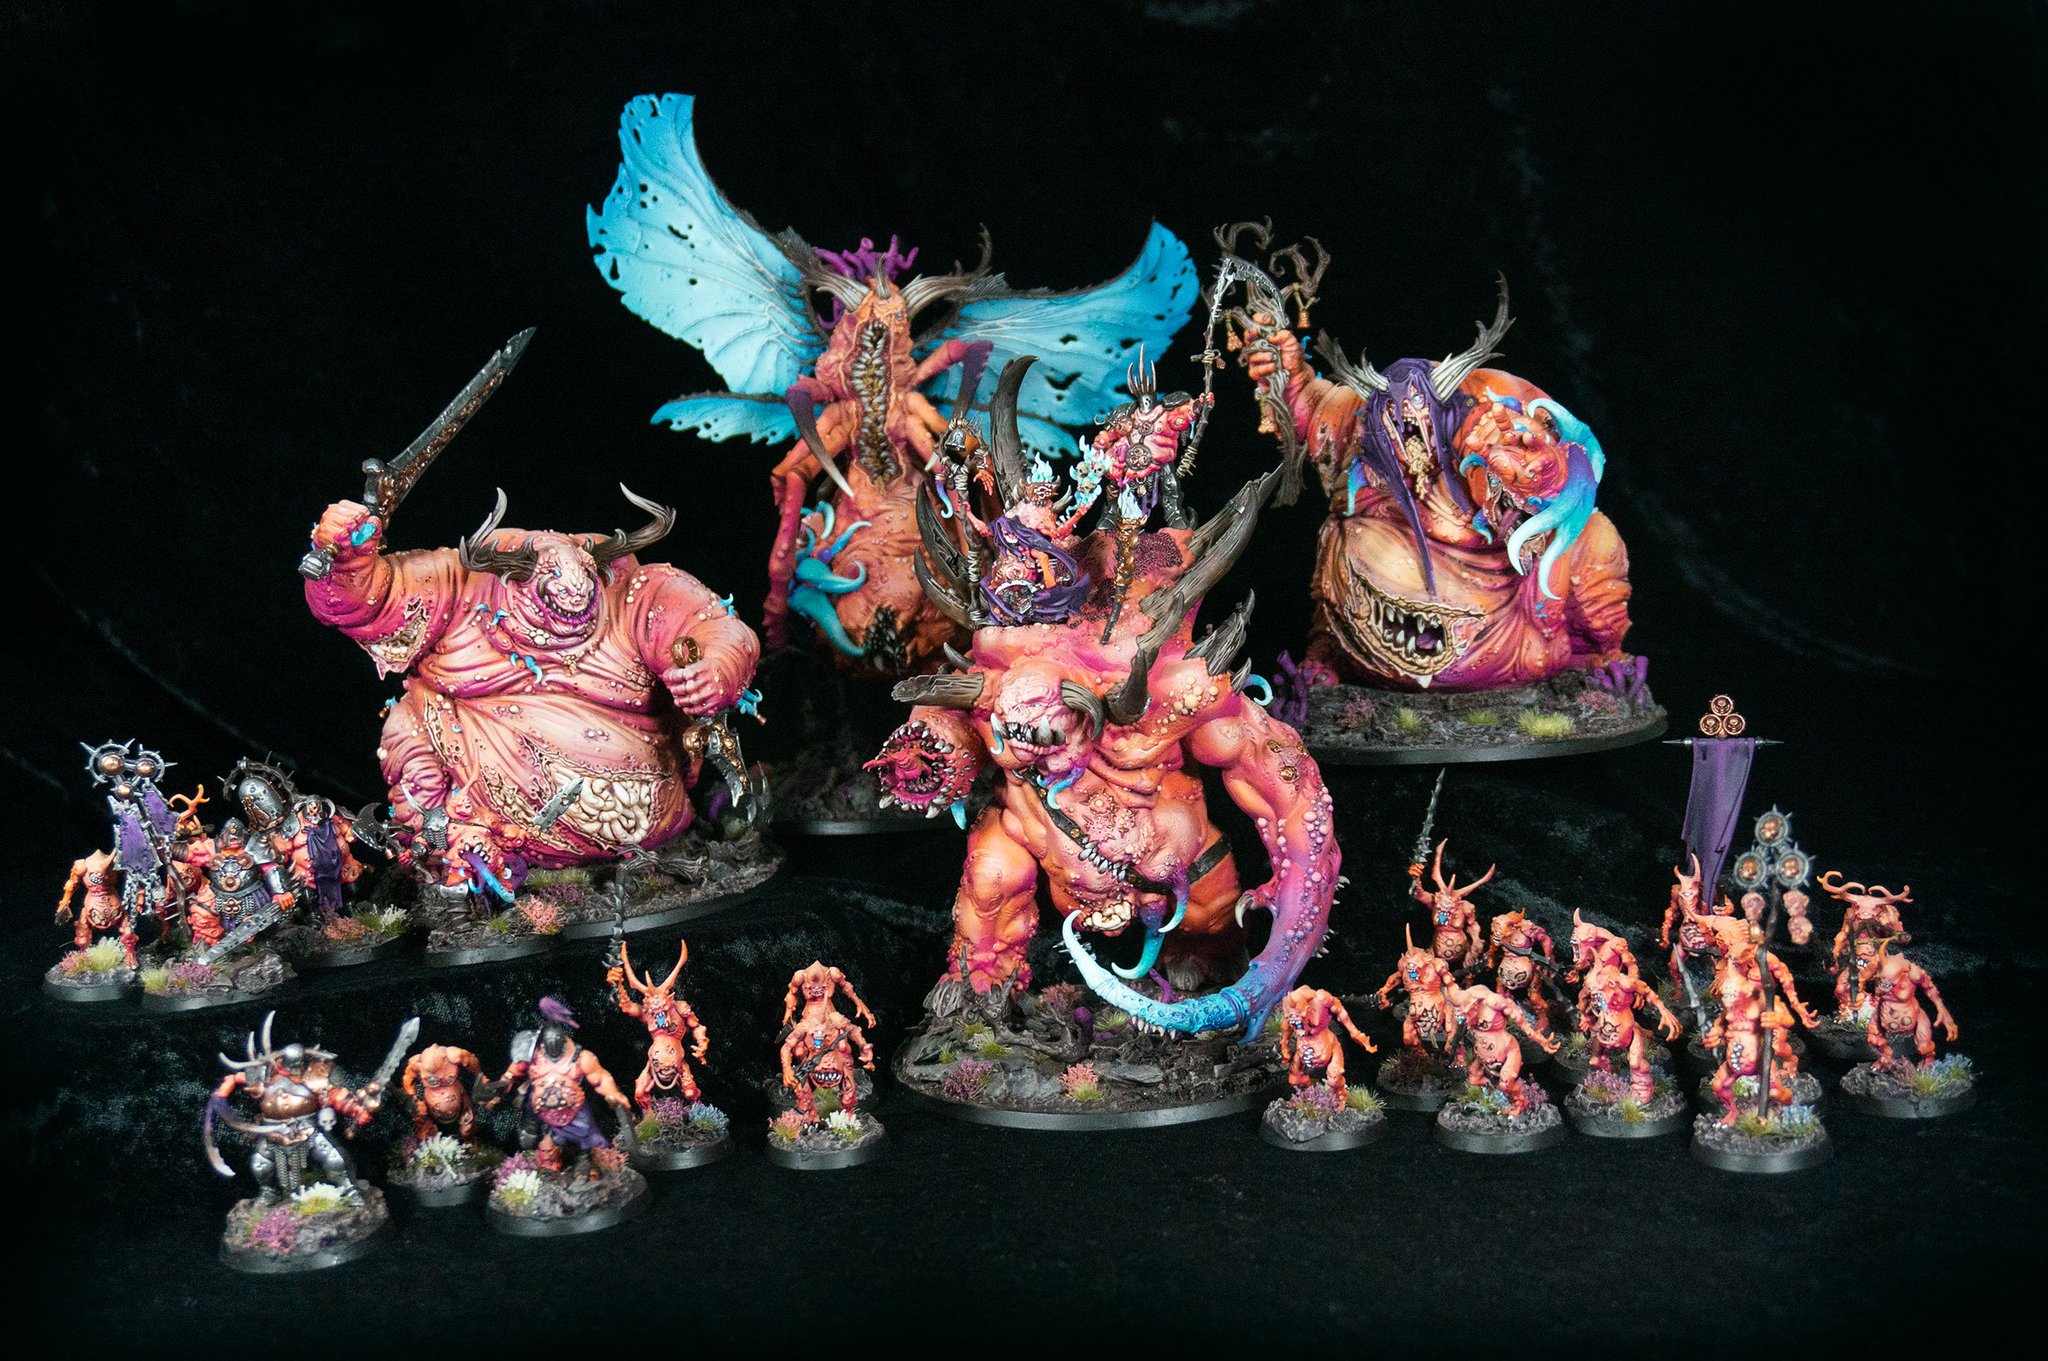 “Finally got round to taking some pics of my Nurgle army!! 